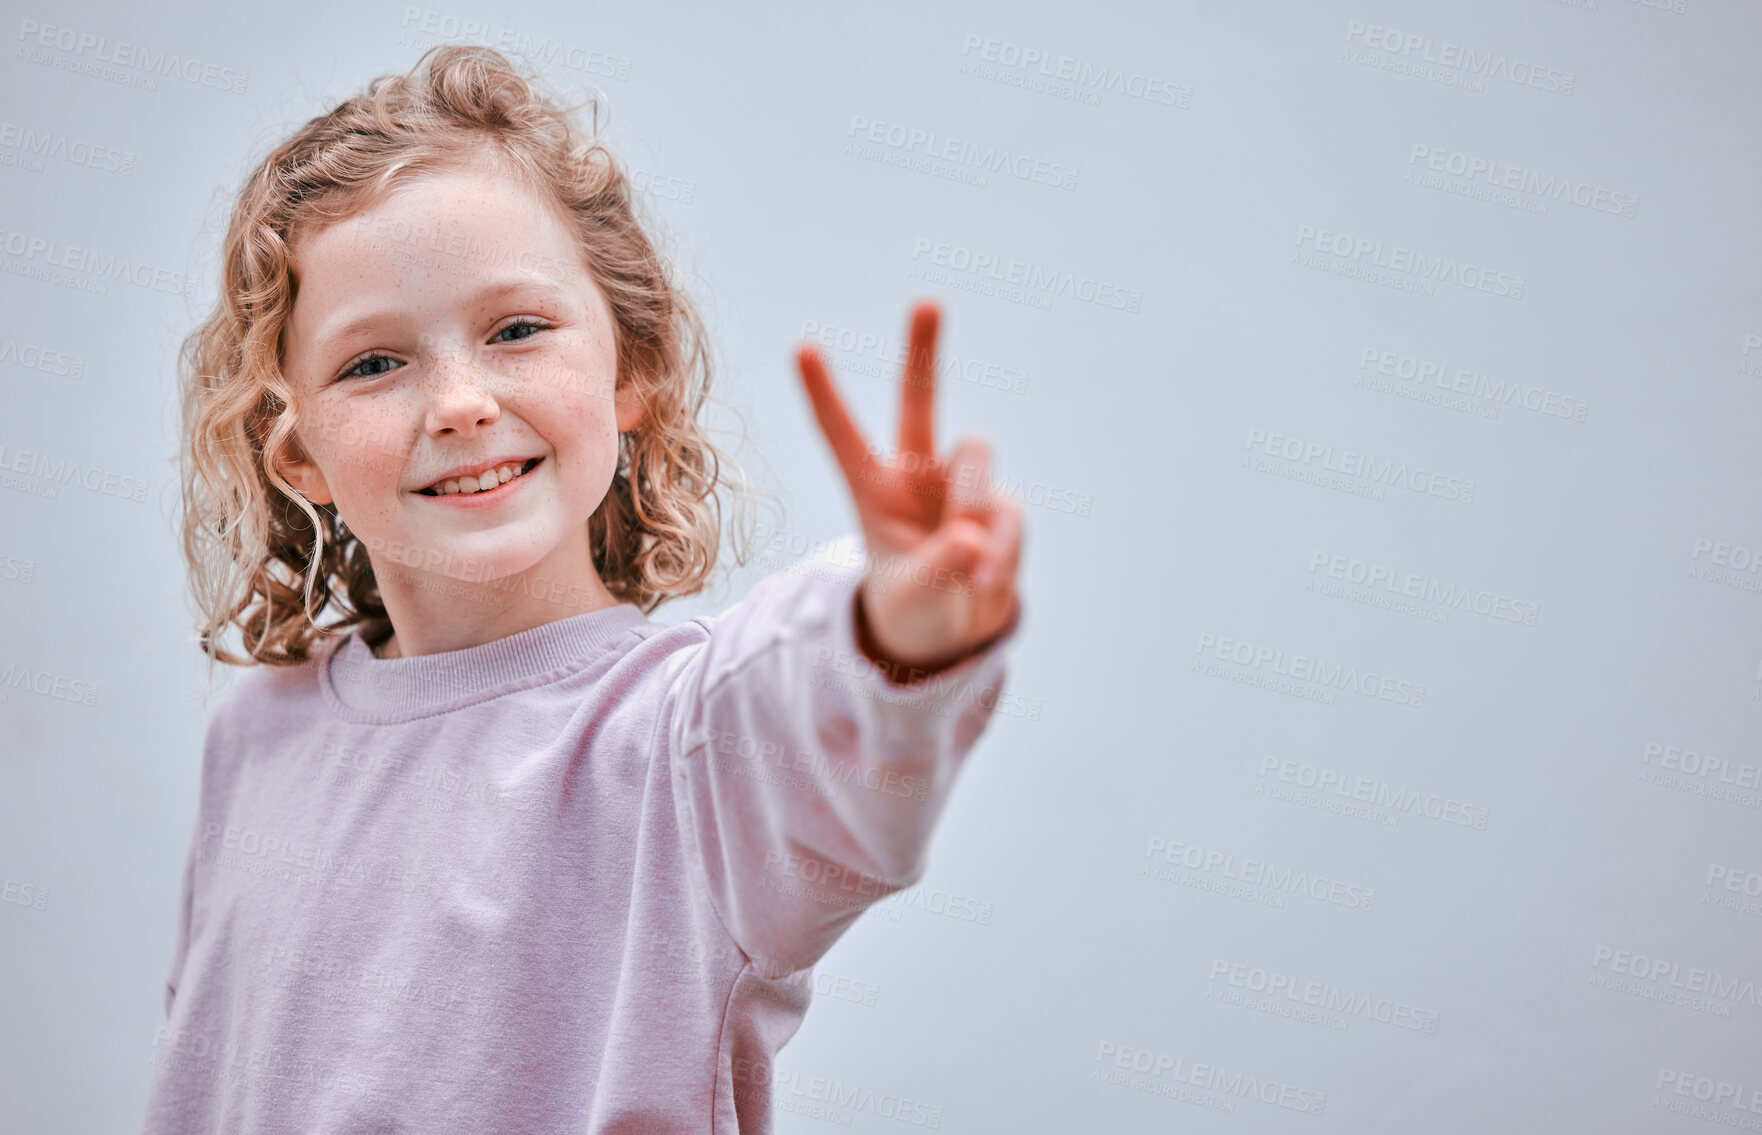 Buy stock photo Studio shot of a little girl making a peace sign against a grey background